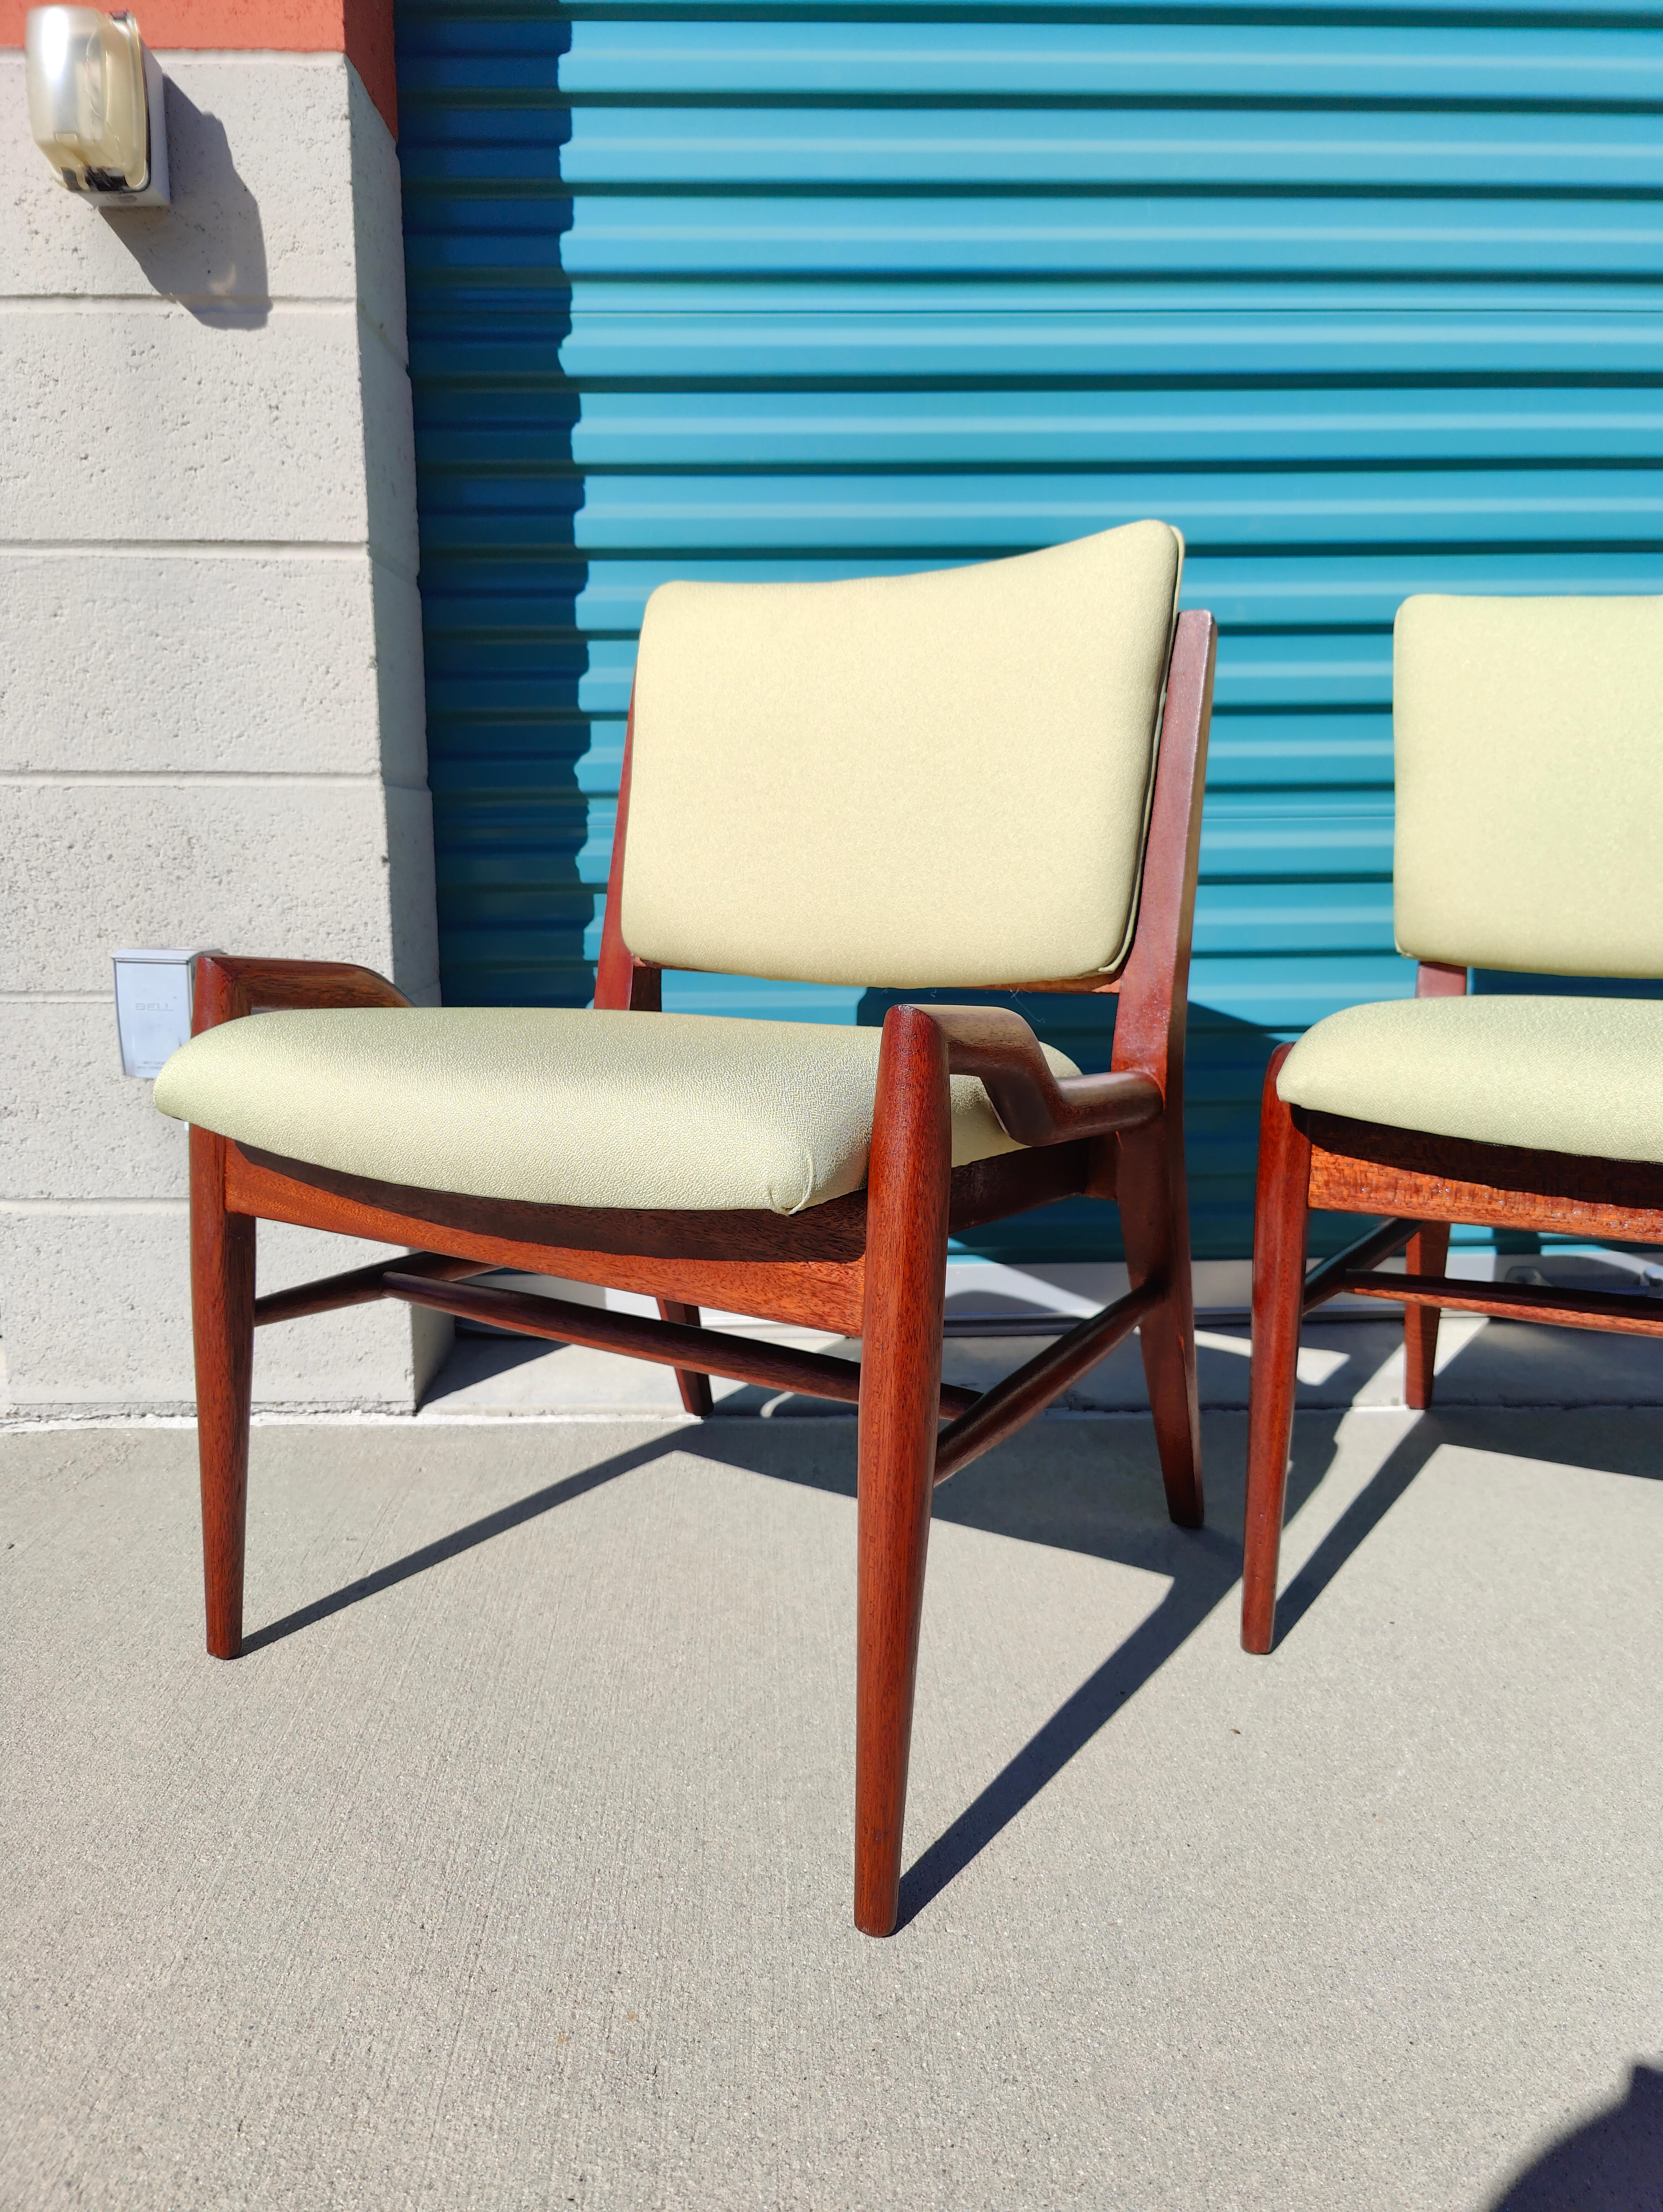 Vintage Mid-Century Modern Mahogony Chairs by Brown Saltman For Sale 9